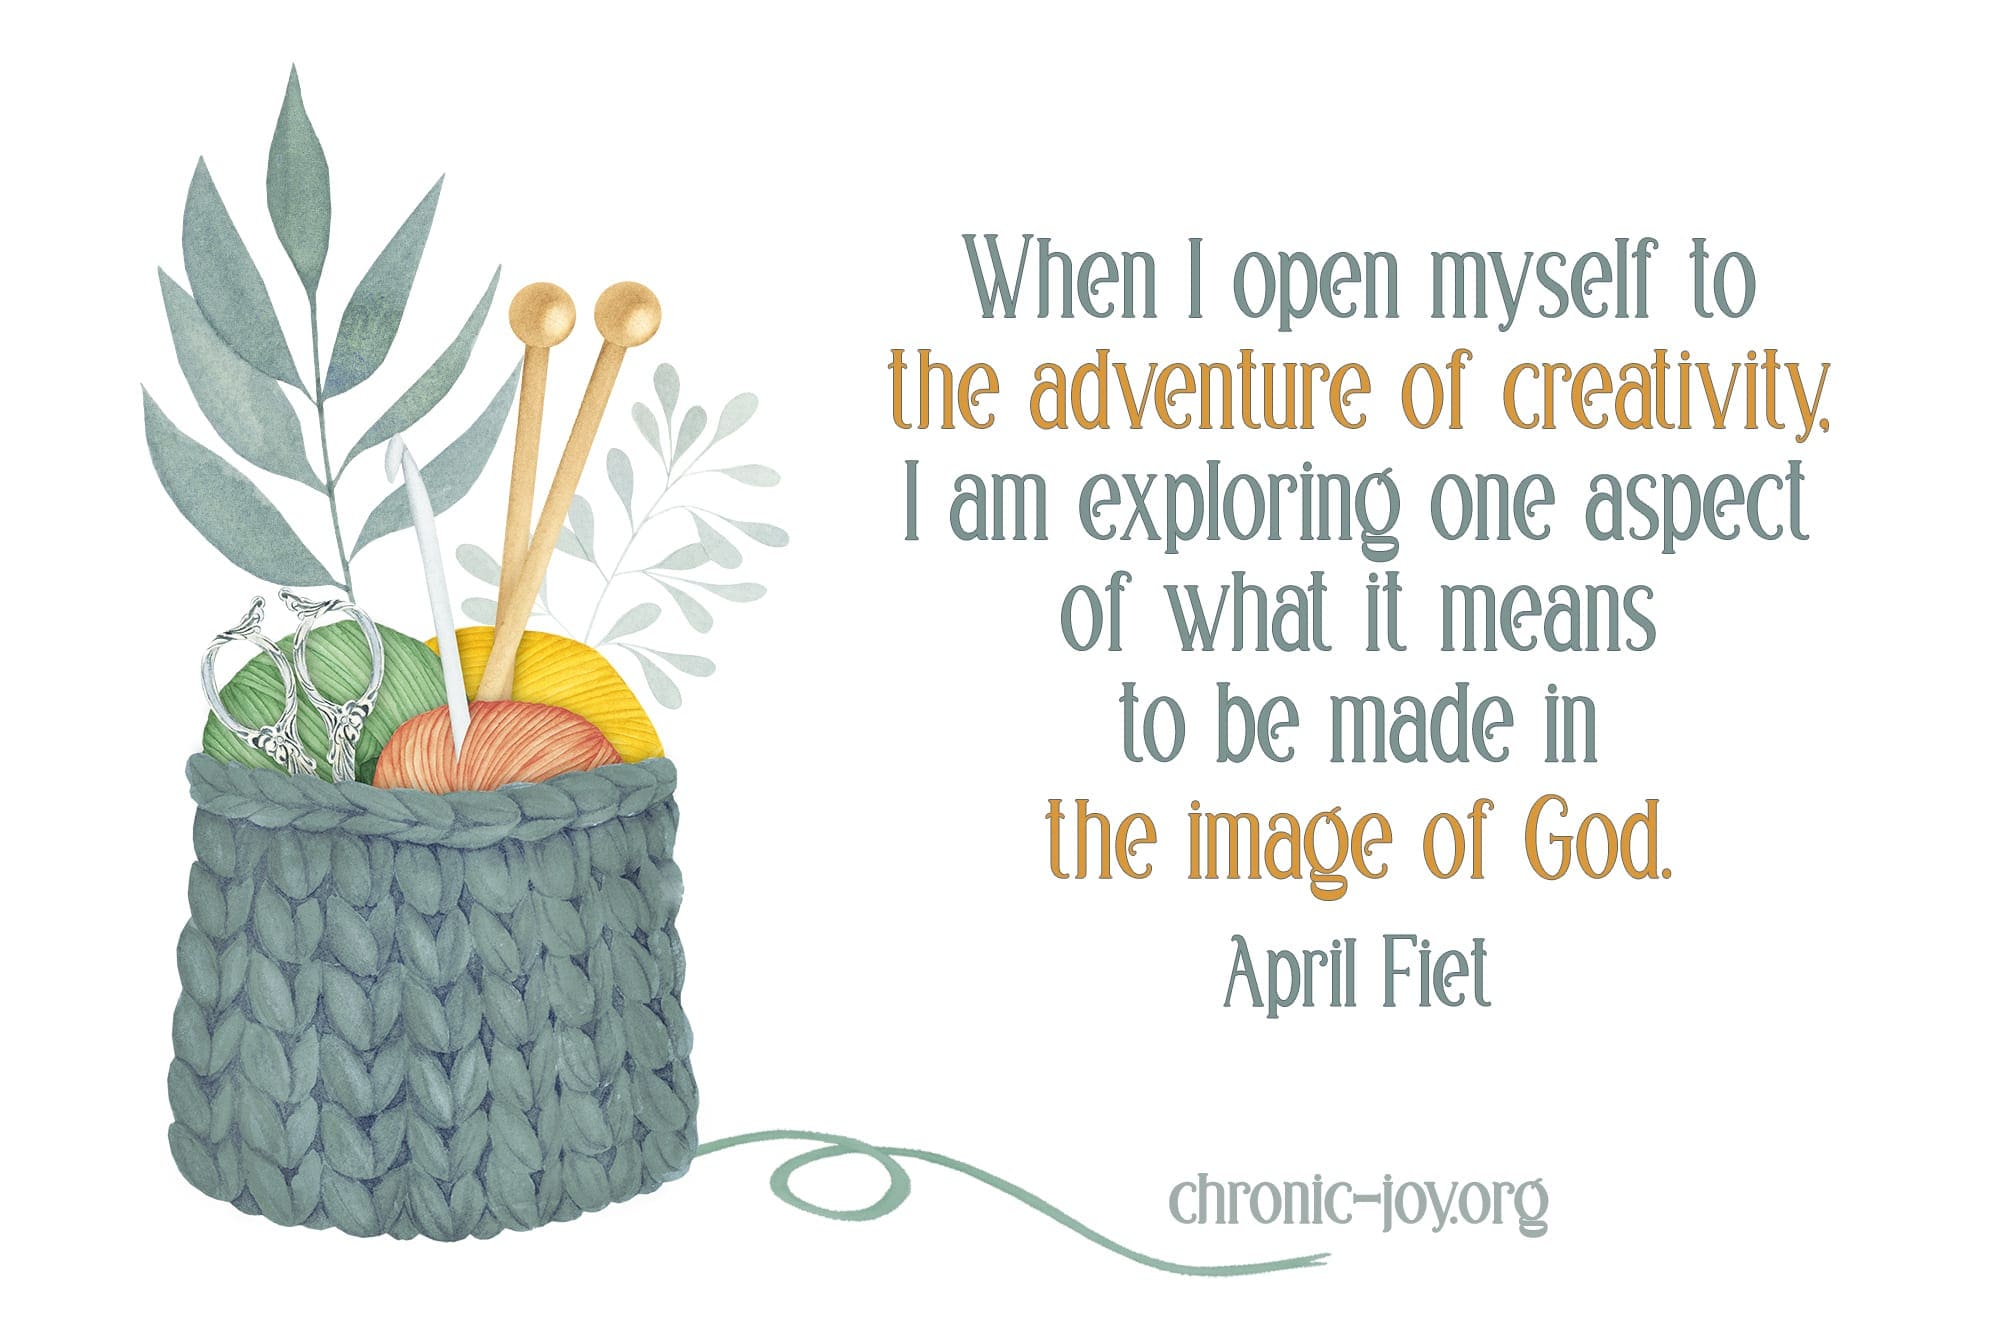 "When I open myself to the adventure of creativity, I am exploring one aspect of what it means to be made in the image of God." April Fiet